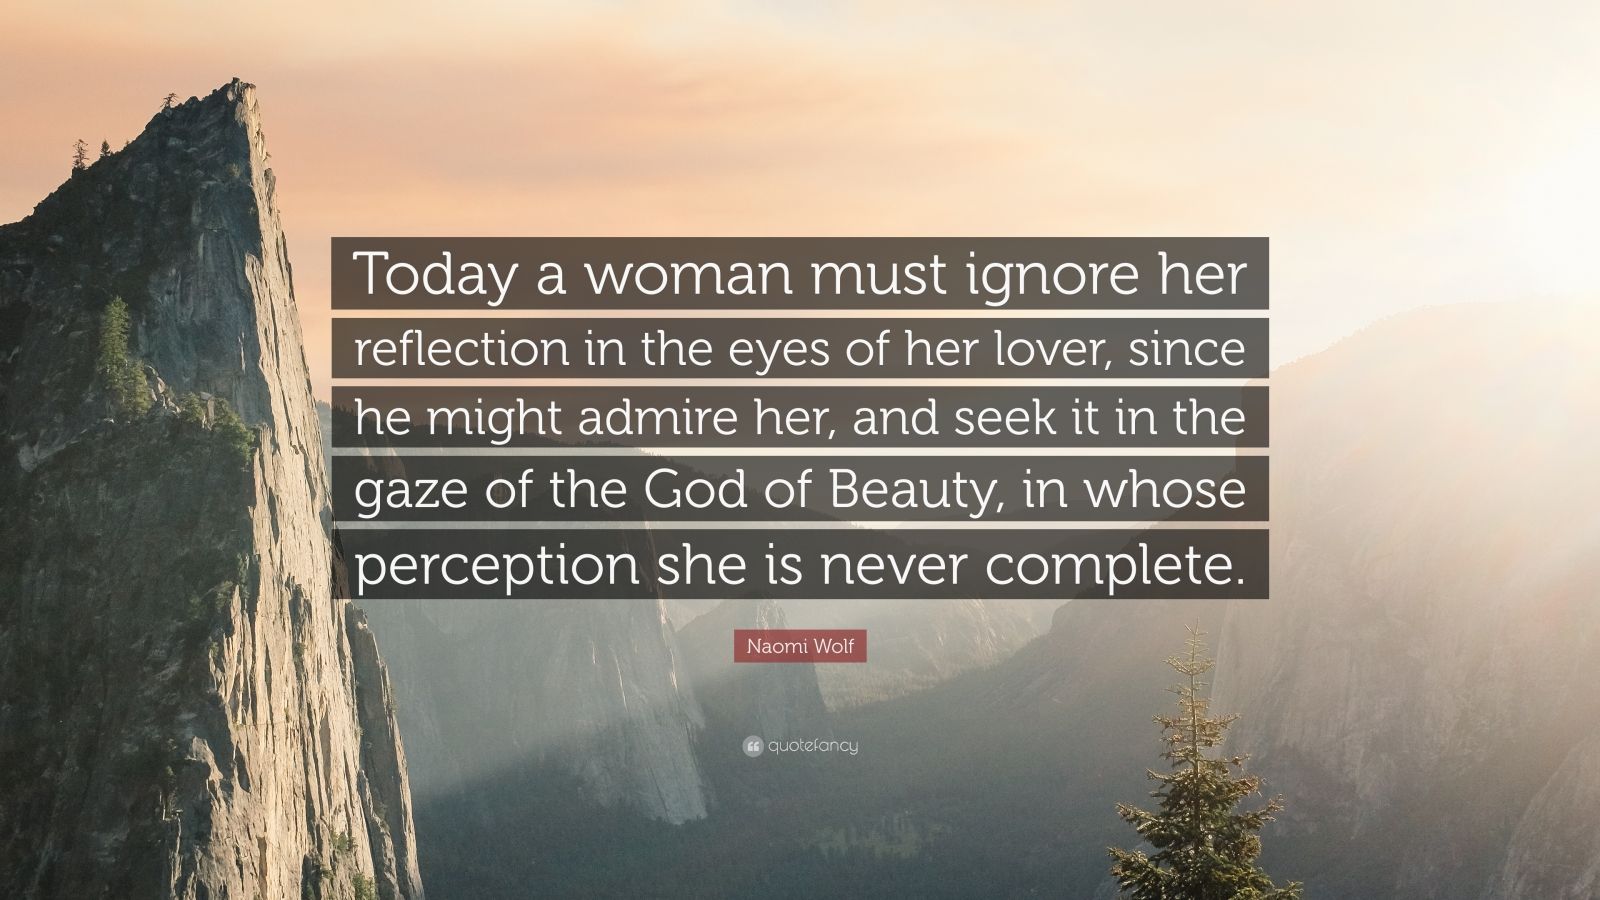 Naomi Wolf Quote: “Today a woman must ignore her reflection in the eyes ...